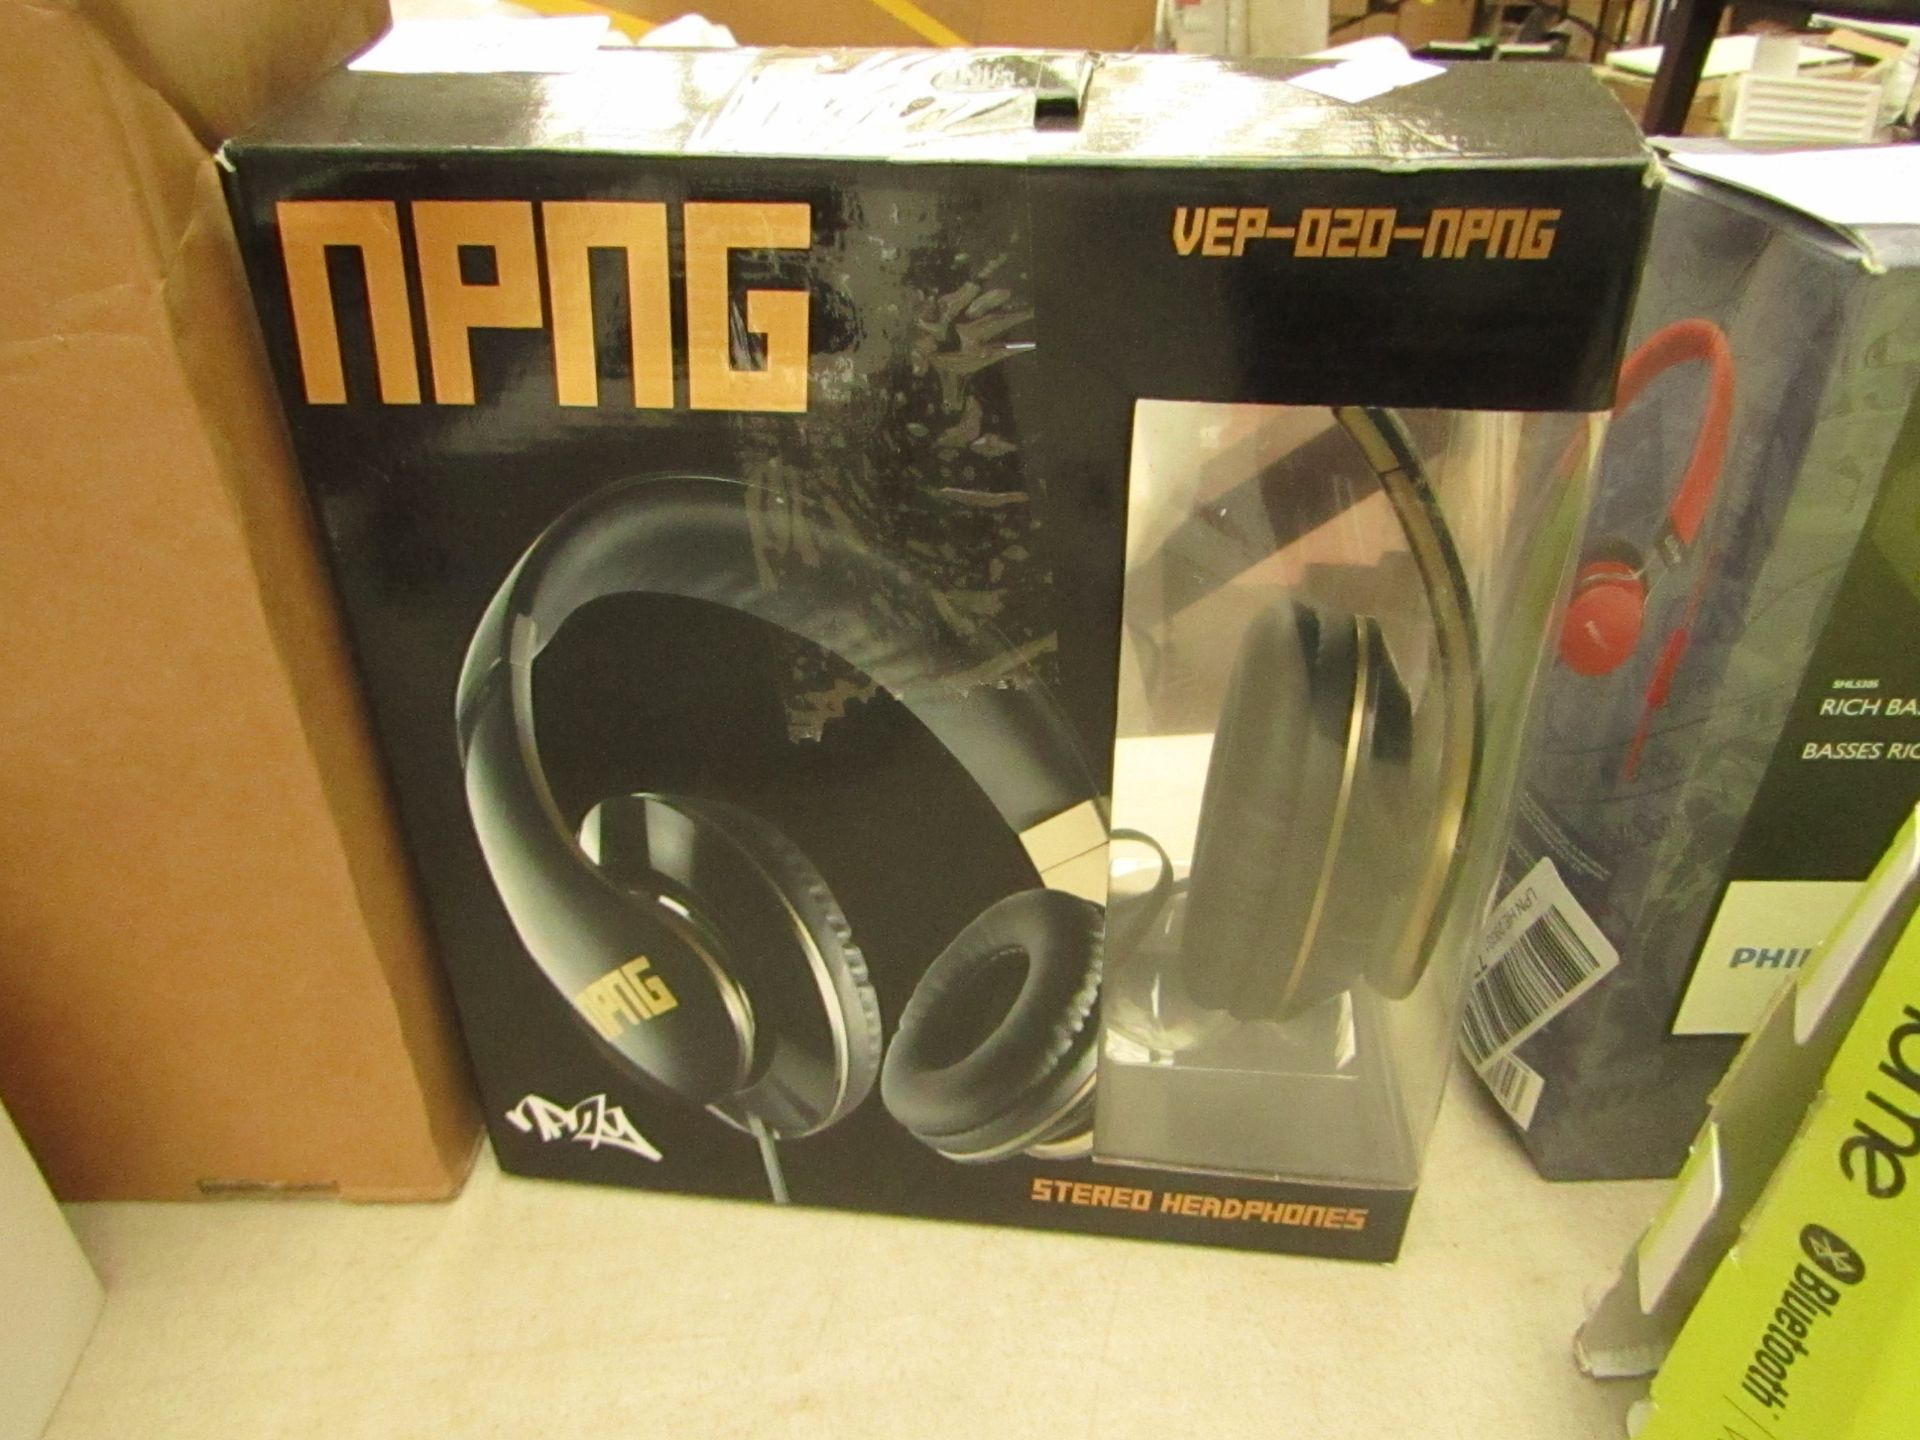 Npng Vep-020-Npng Stereo headphones, Unchecked and boxed